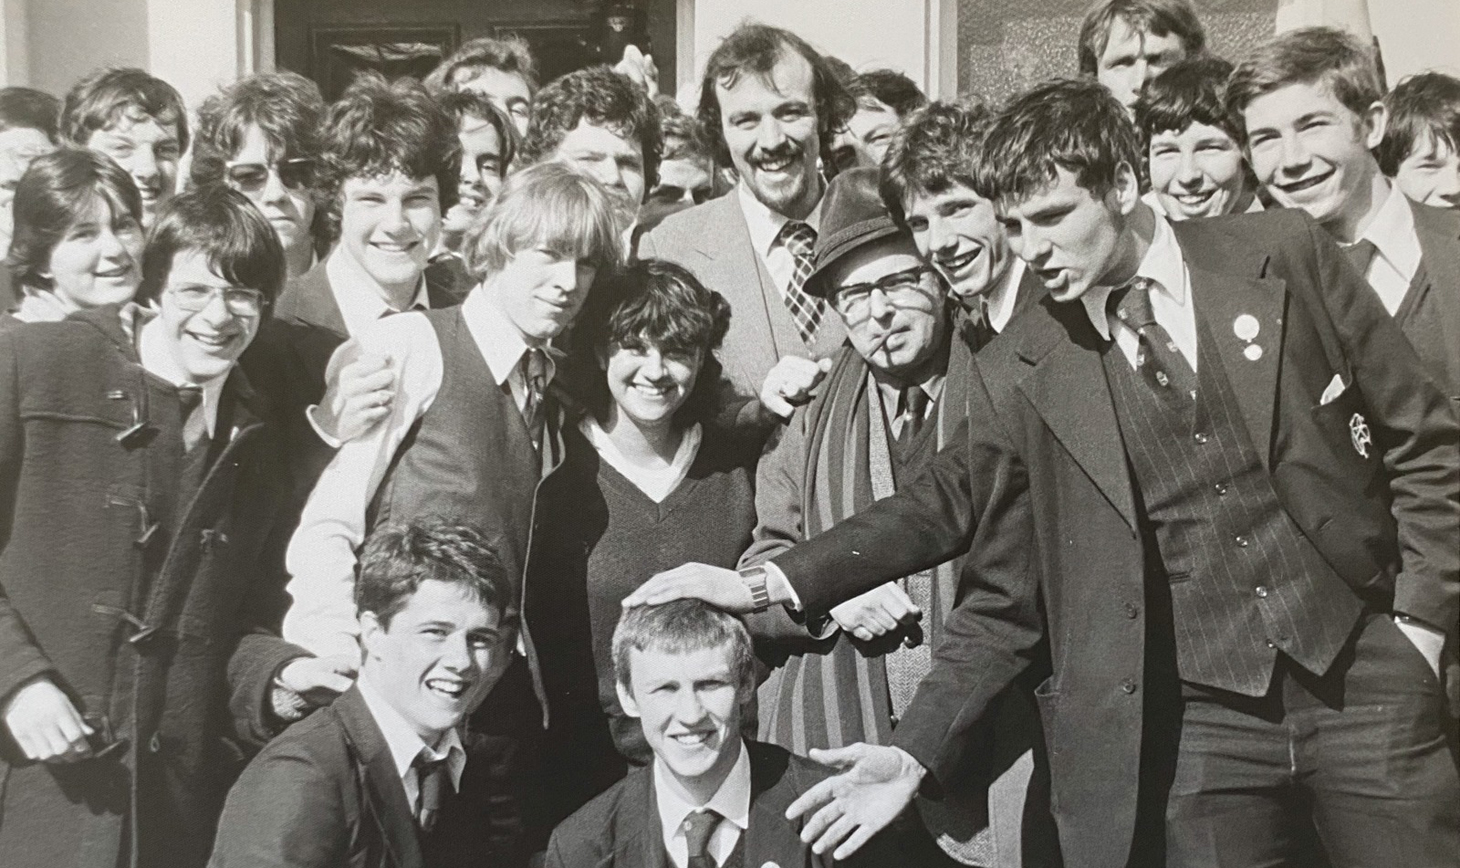 1980 outside Broadfield House – who do you recognise?